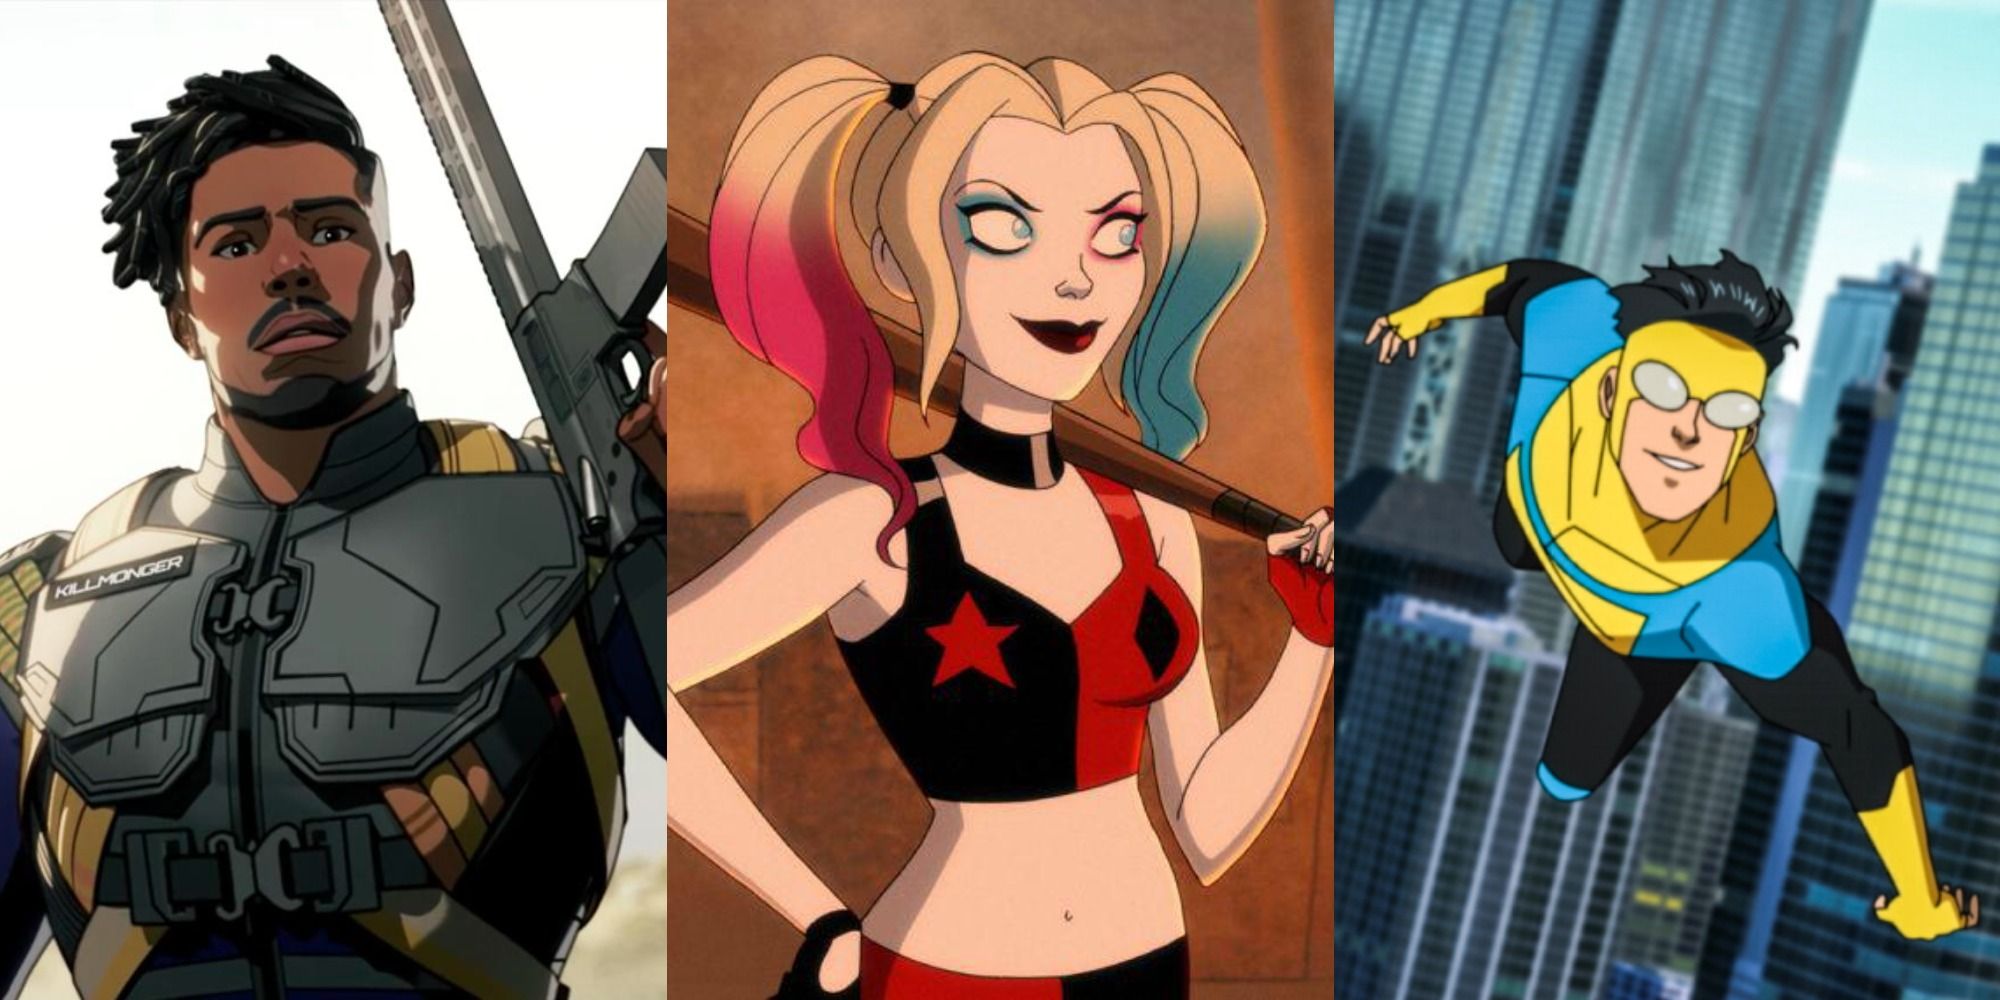 Split image of Killmonger in What If, Harley Quinn in her animated show, and Mark from Invincible